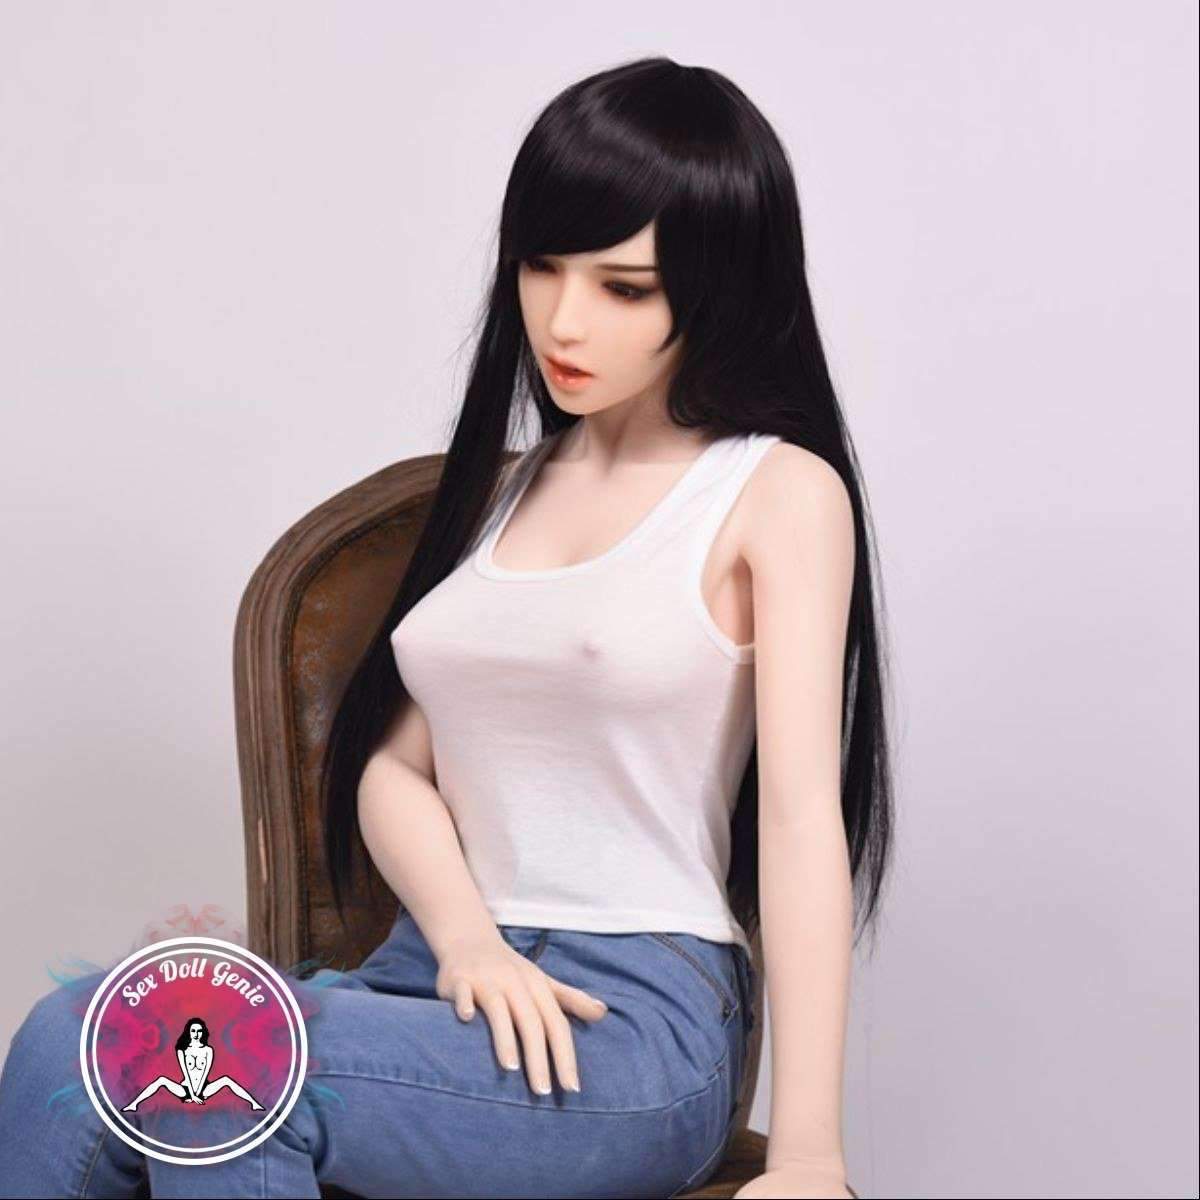 DS Doll - 163Plus - Kayla Head - Type 2 D Cup Silicone Doll-9